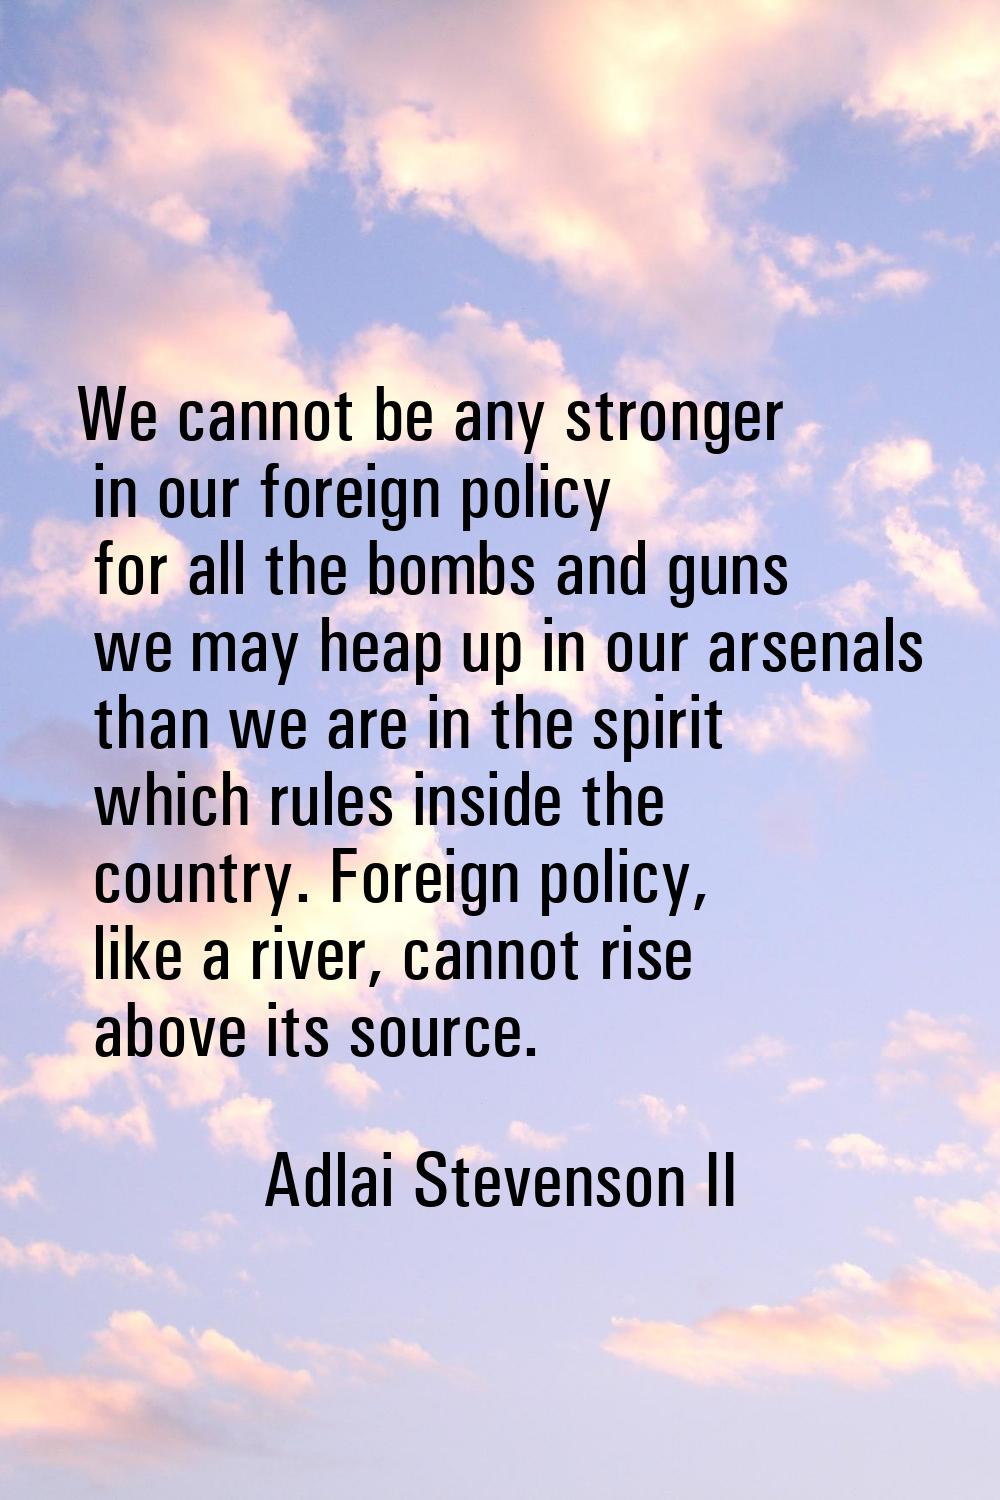 We cannot be any stronger in our foreign policy for all the bombs and guns we may heap up in our ar